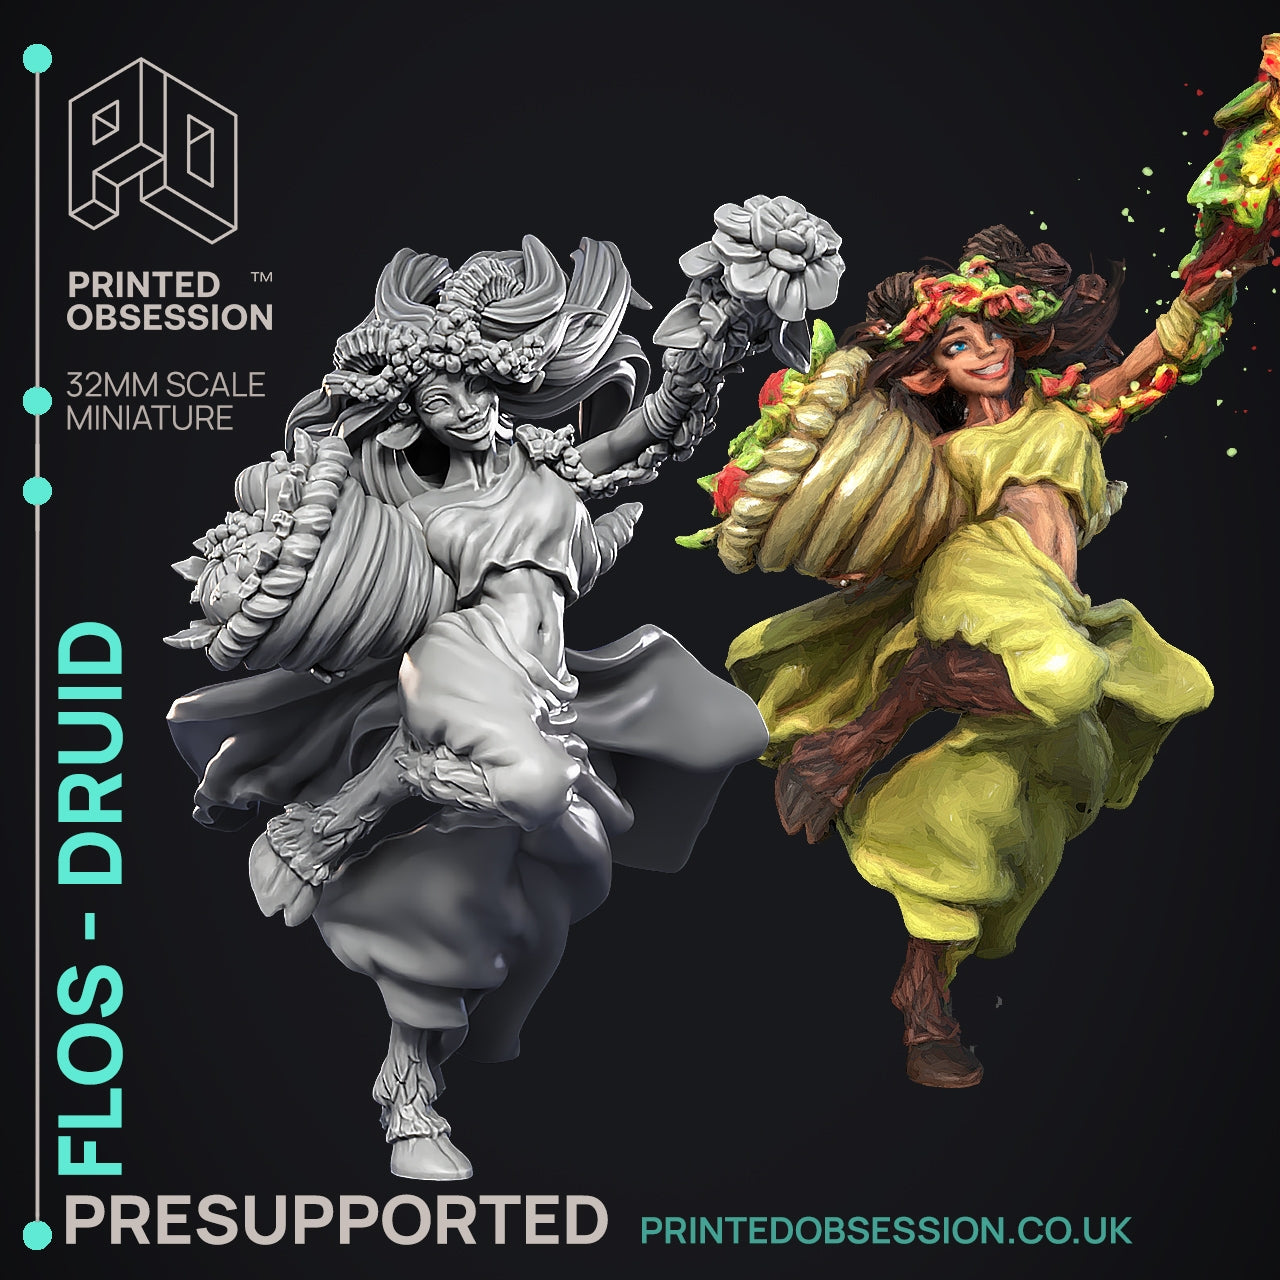 Flos Druid - Godly Avatar series 2 - The Printed Obsession - Table-top mini, 3D Printed Collectable for painting and playing!